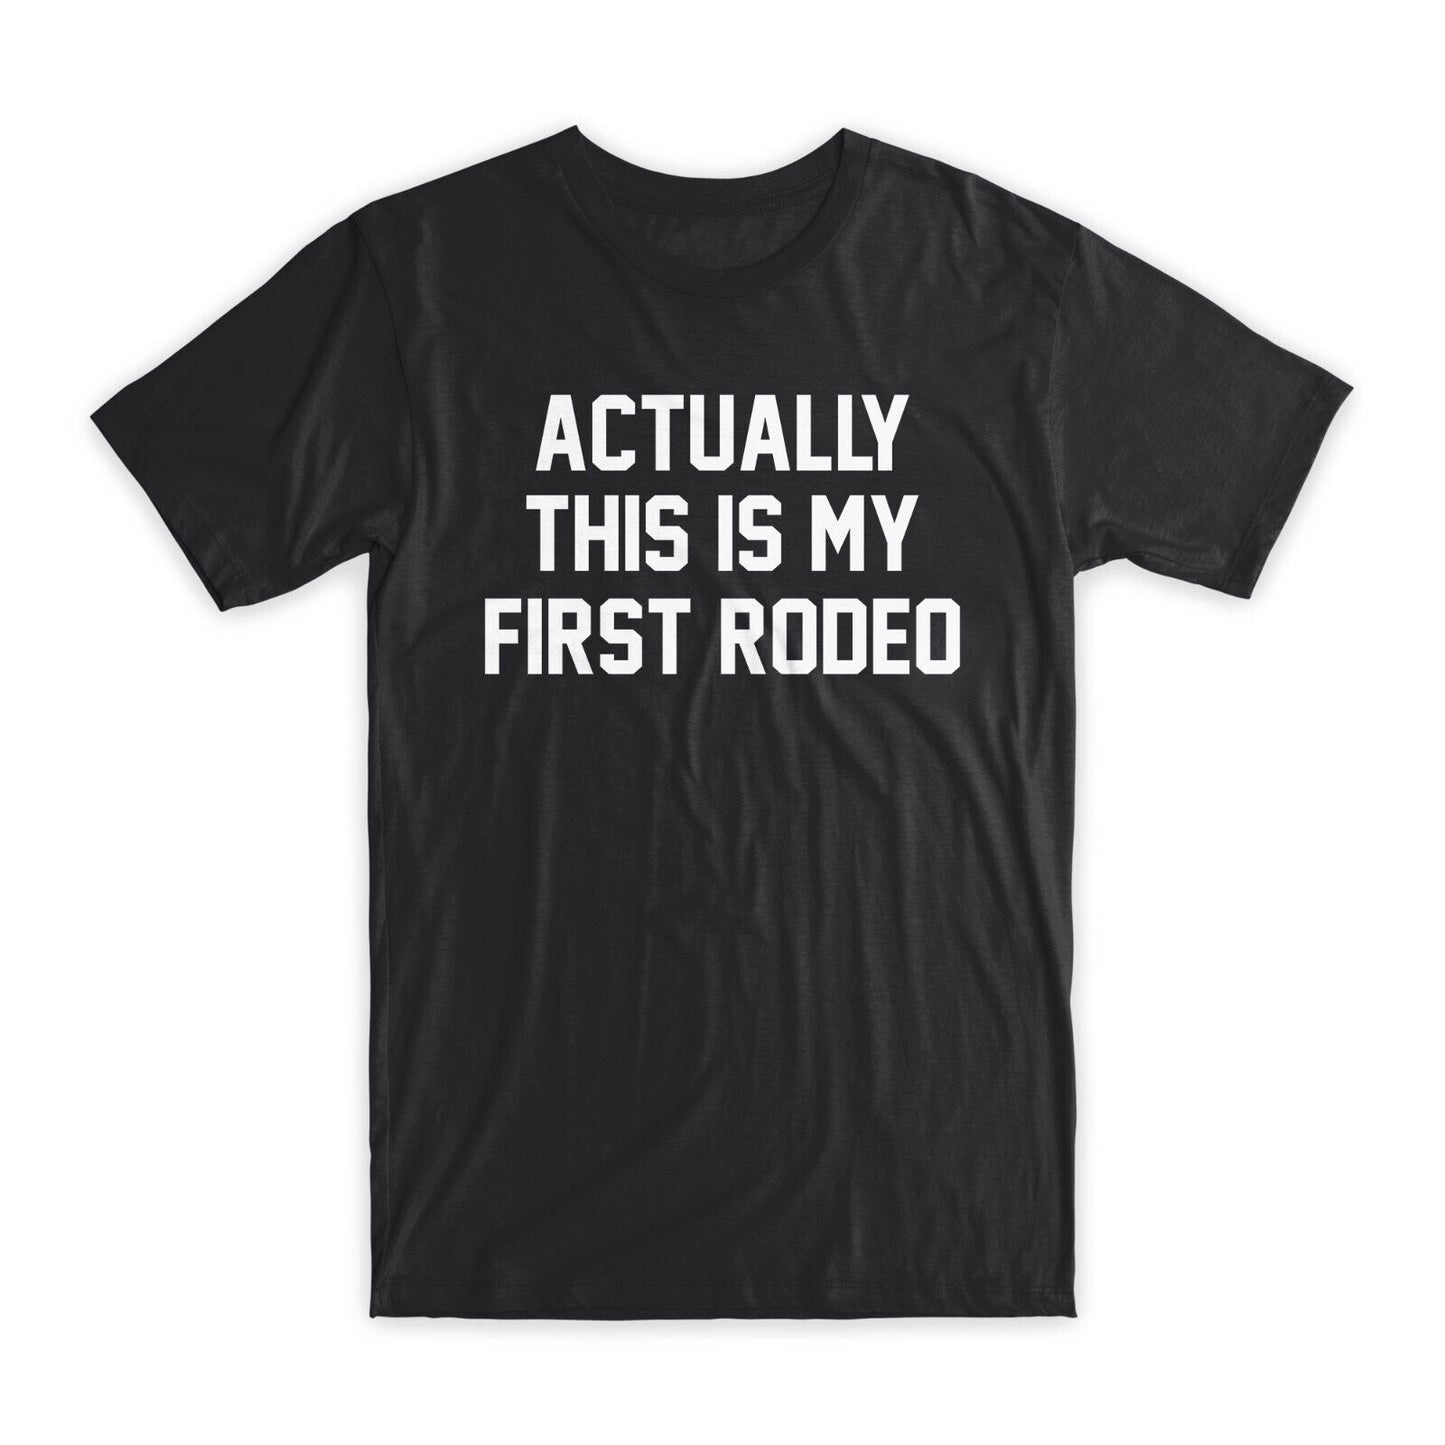 Actually This is My First Rodeo T-Shirt Soft Cotton Funny Tees, Black/Gray NEW